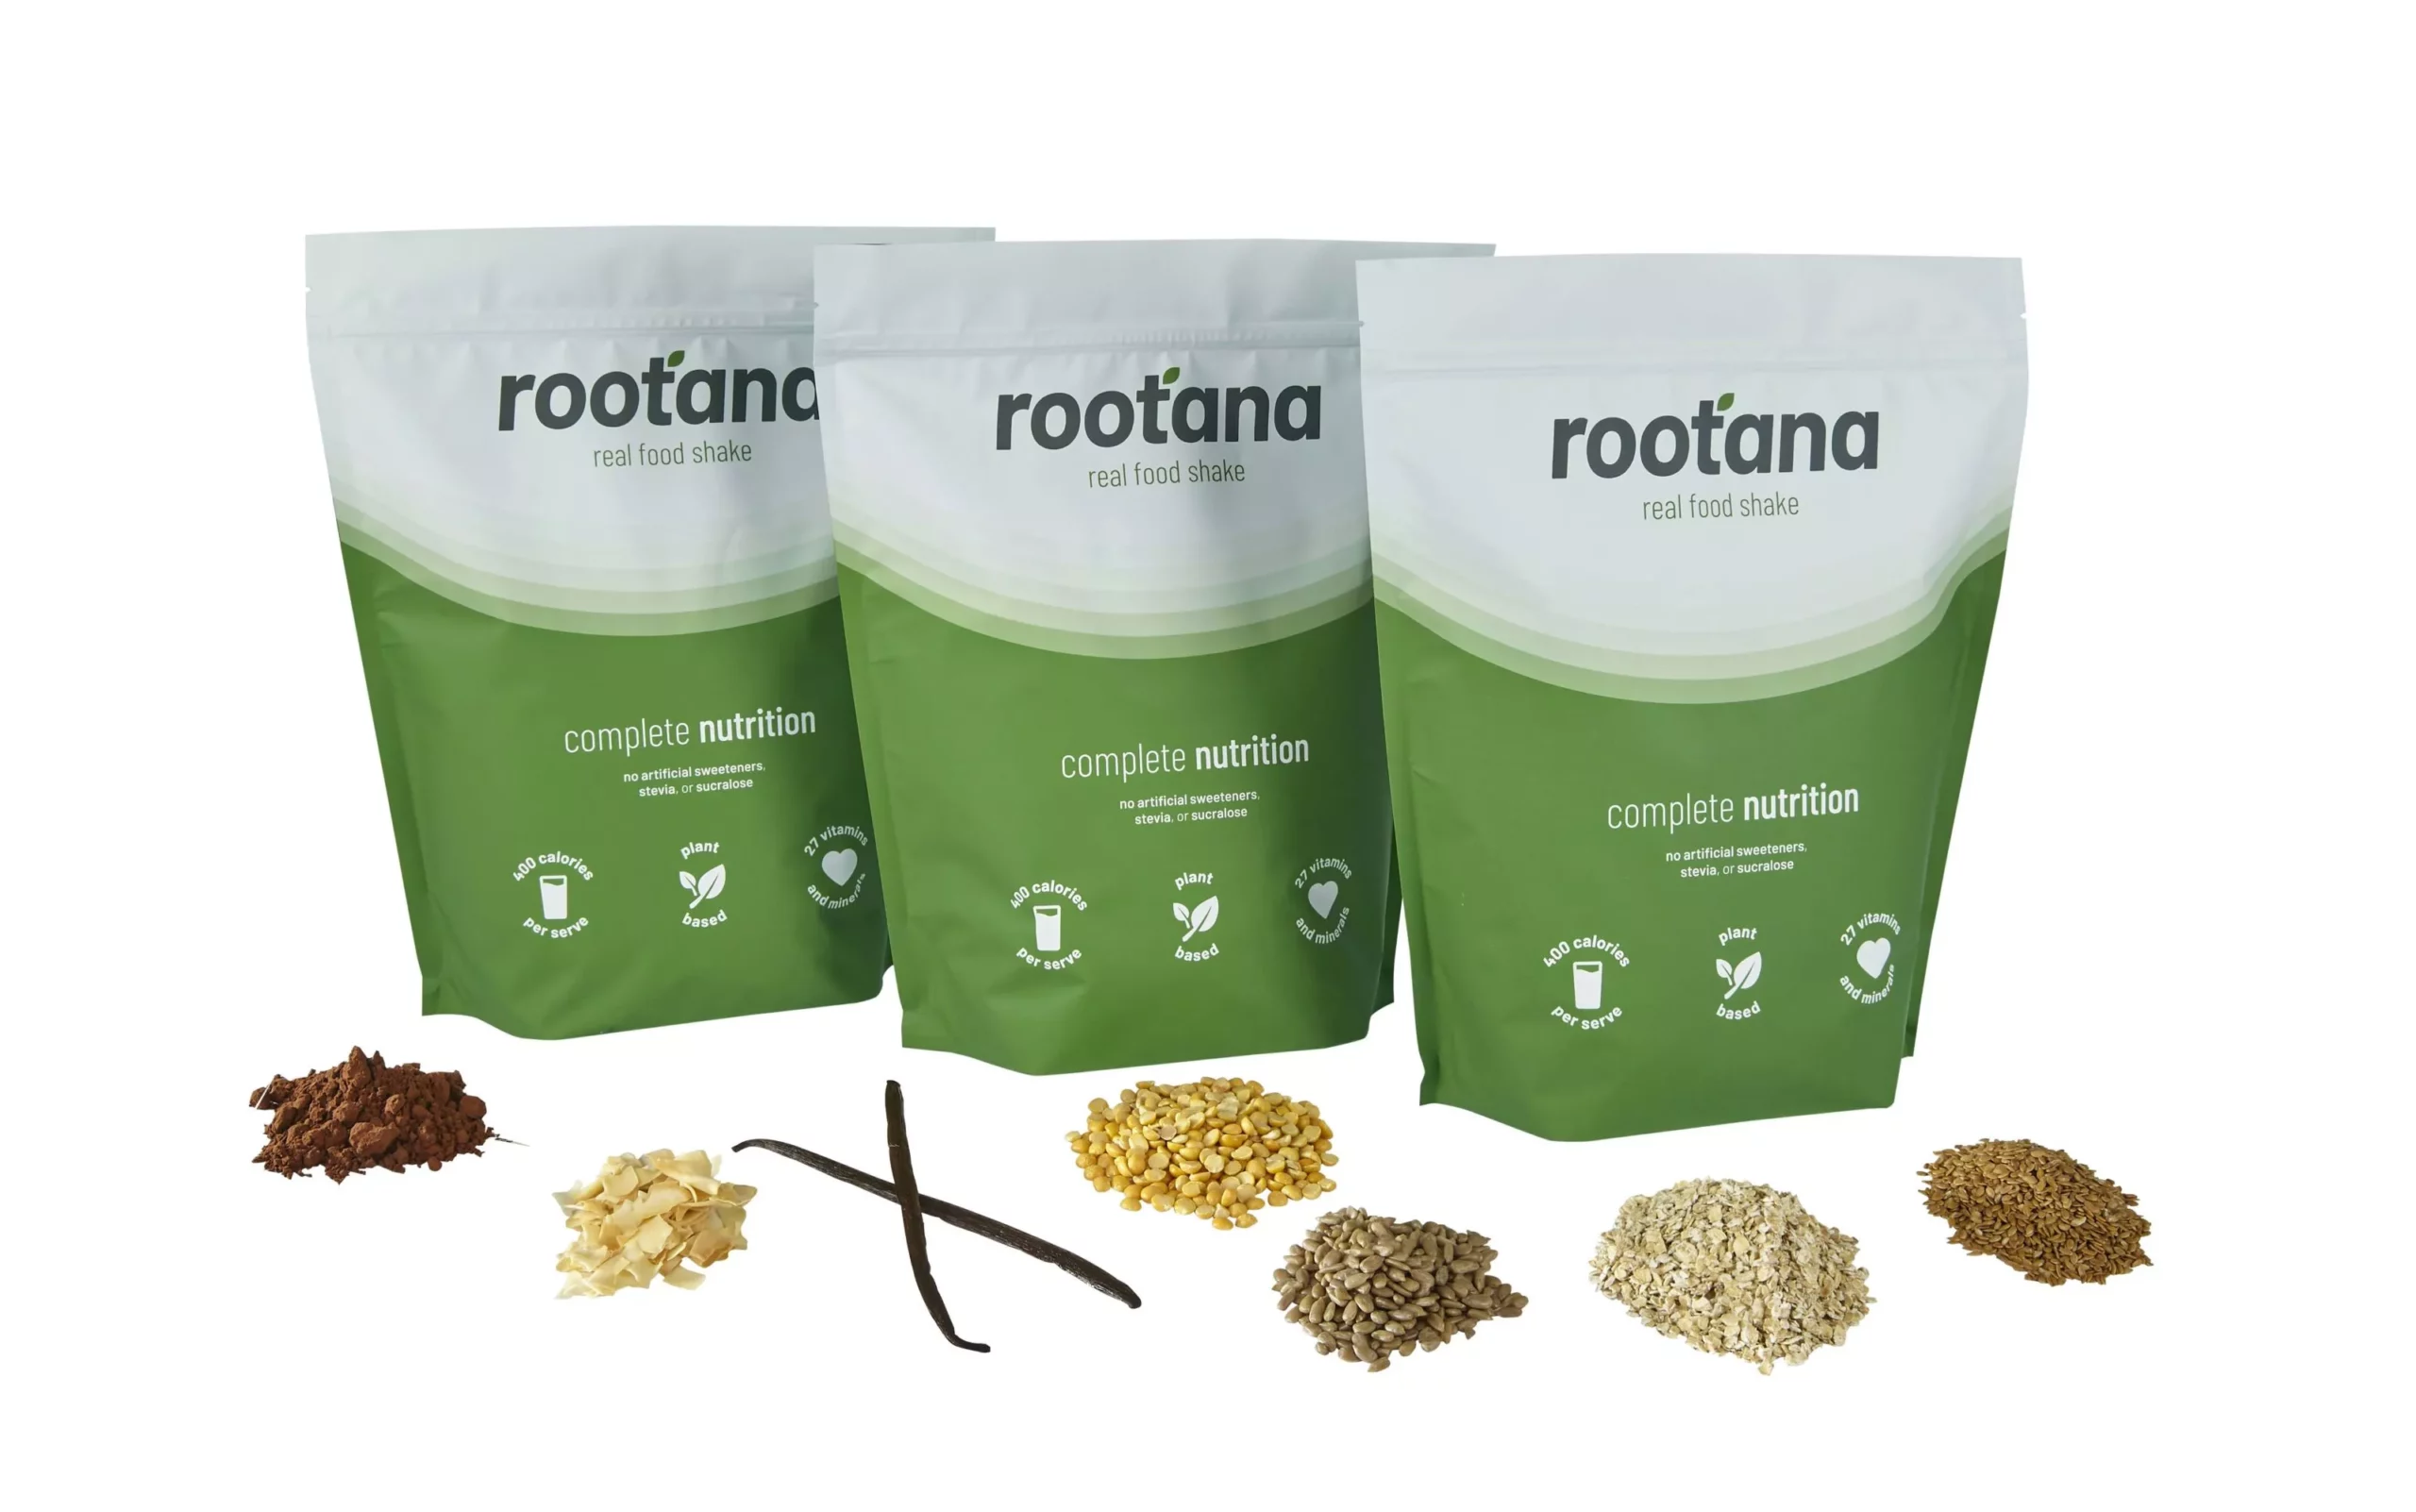 A Deep Dive into the Rootana Ingredients List